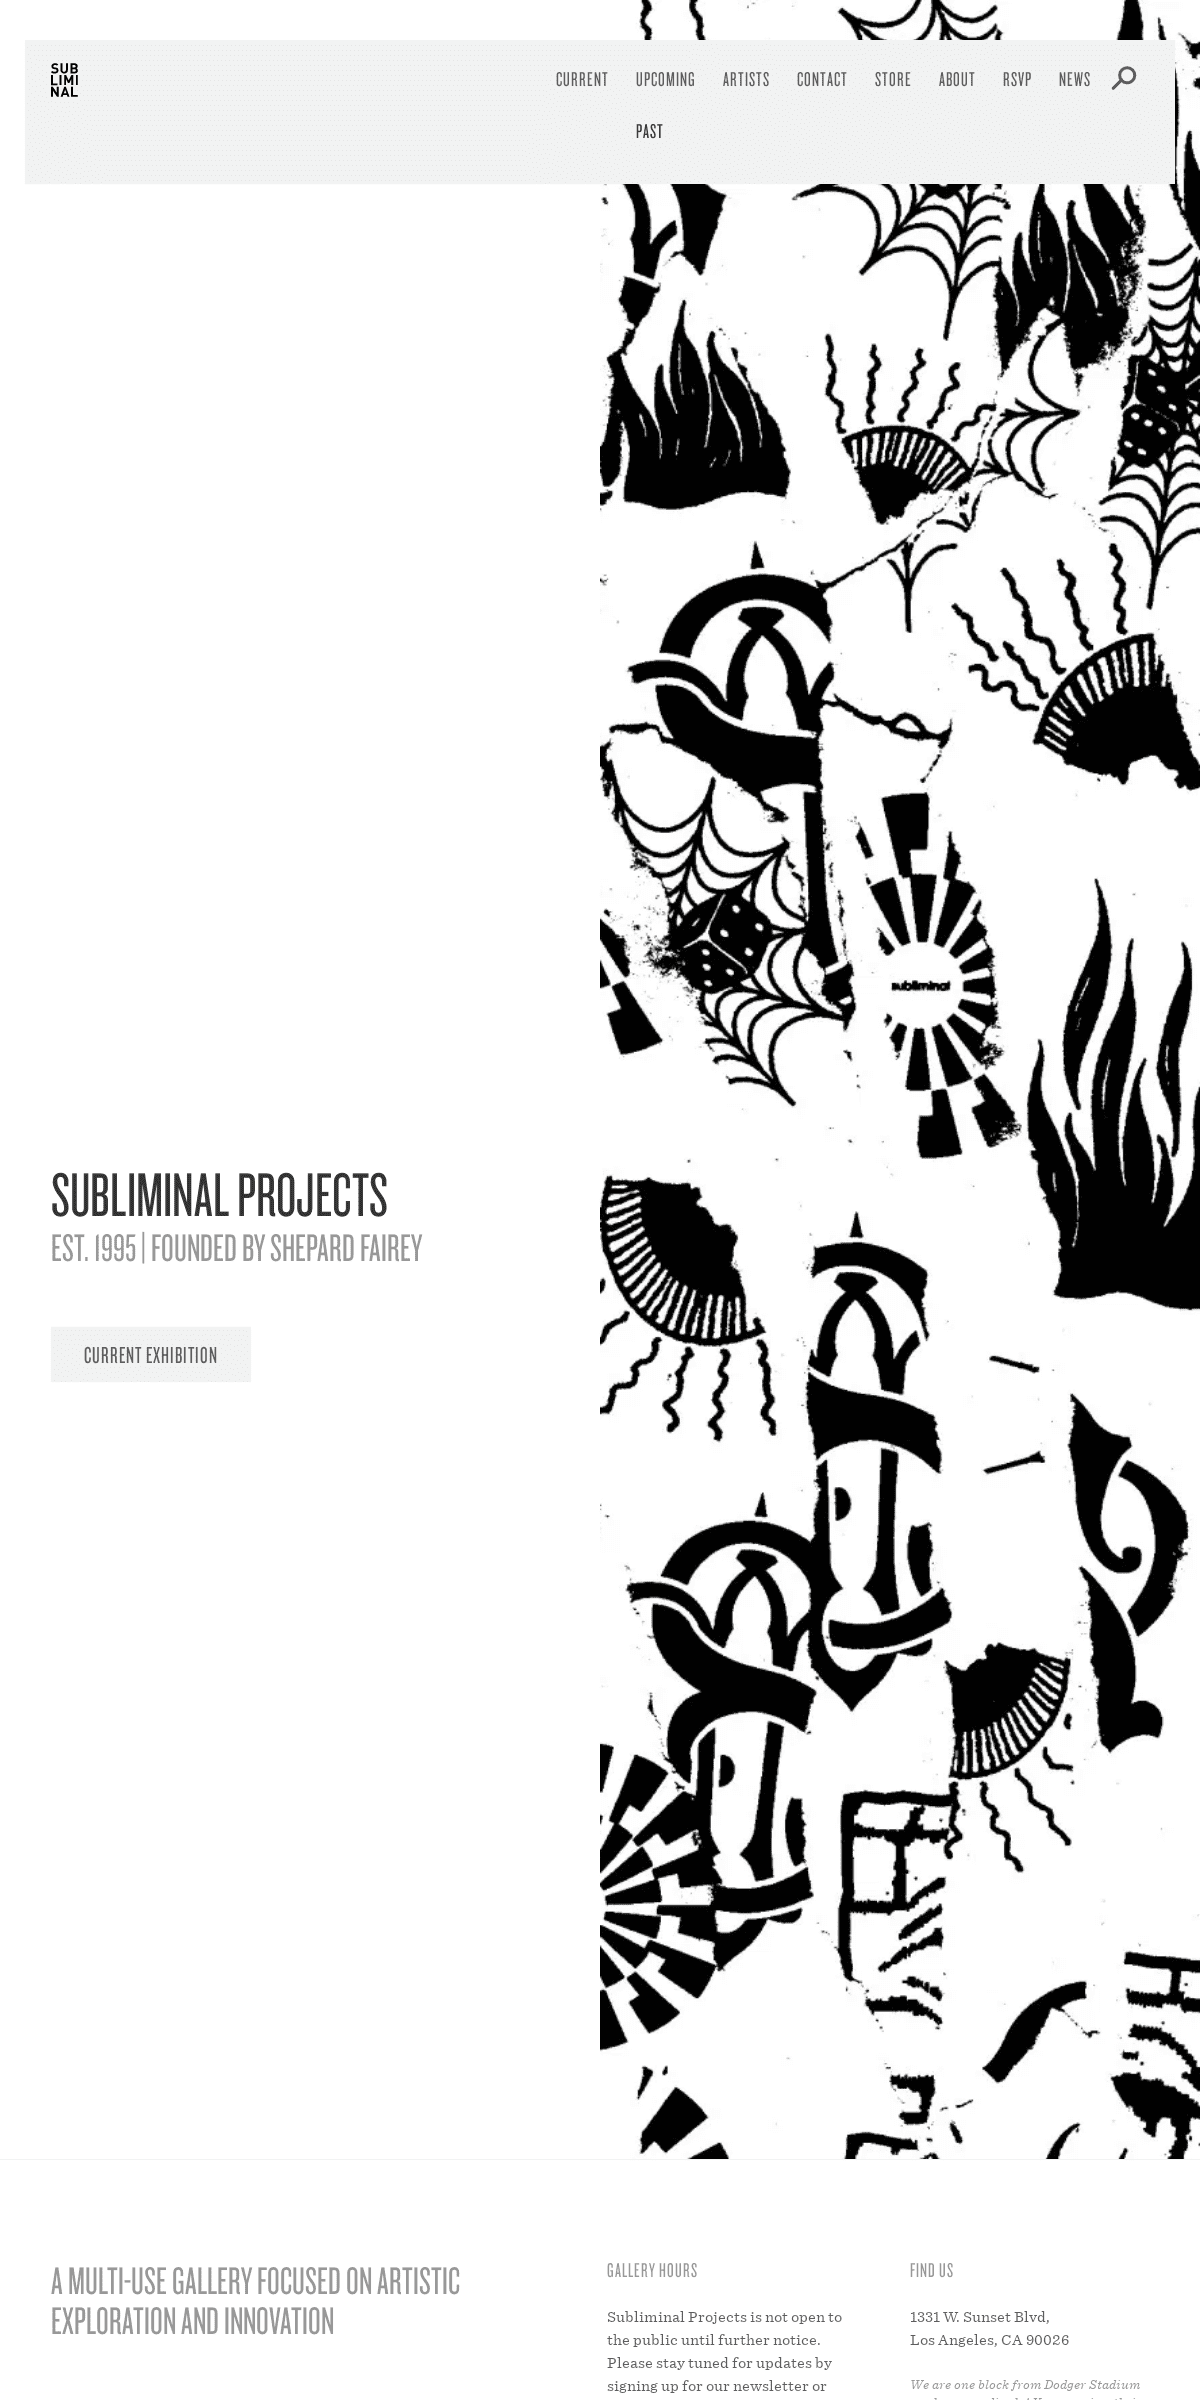 A complete backup of subliminalprojects.com